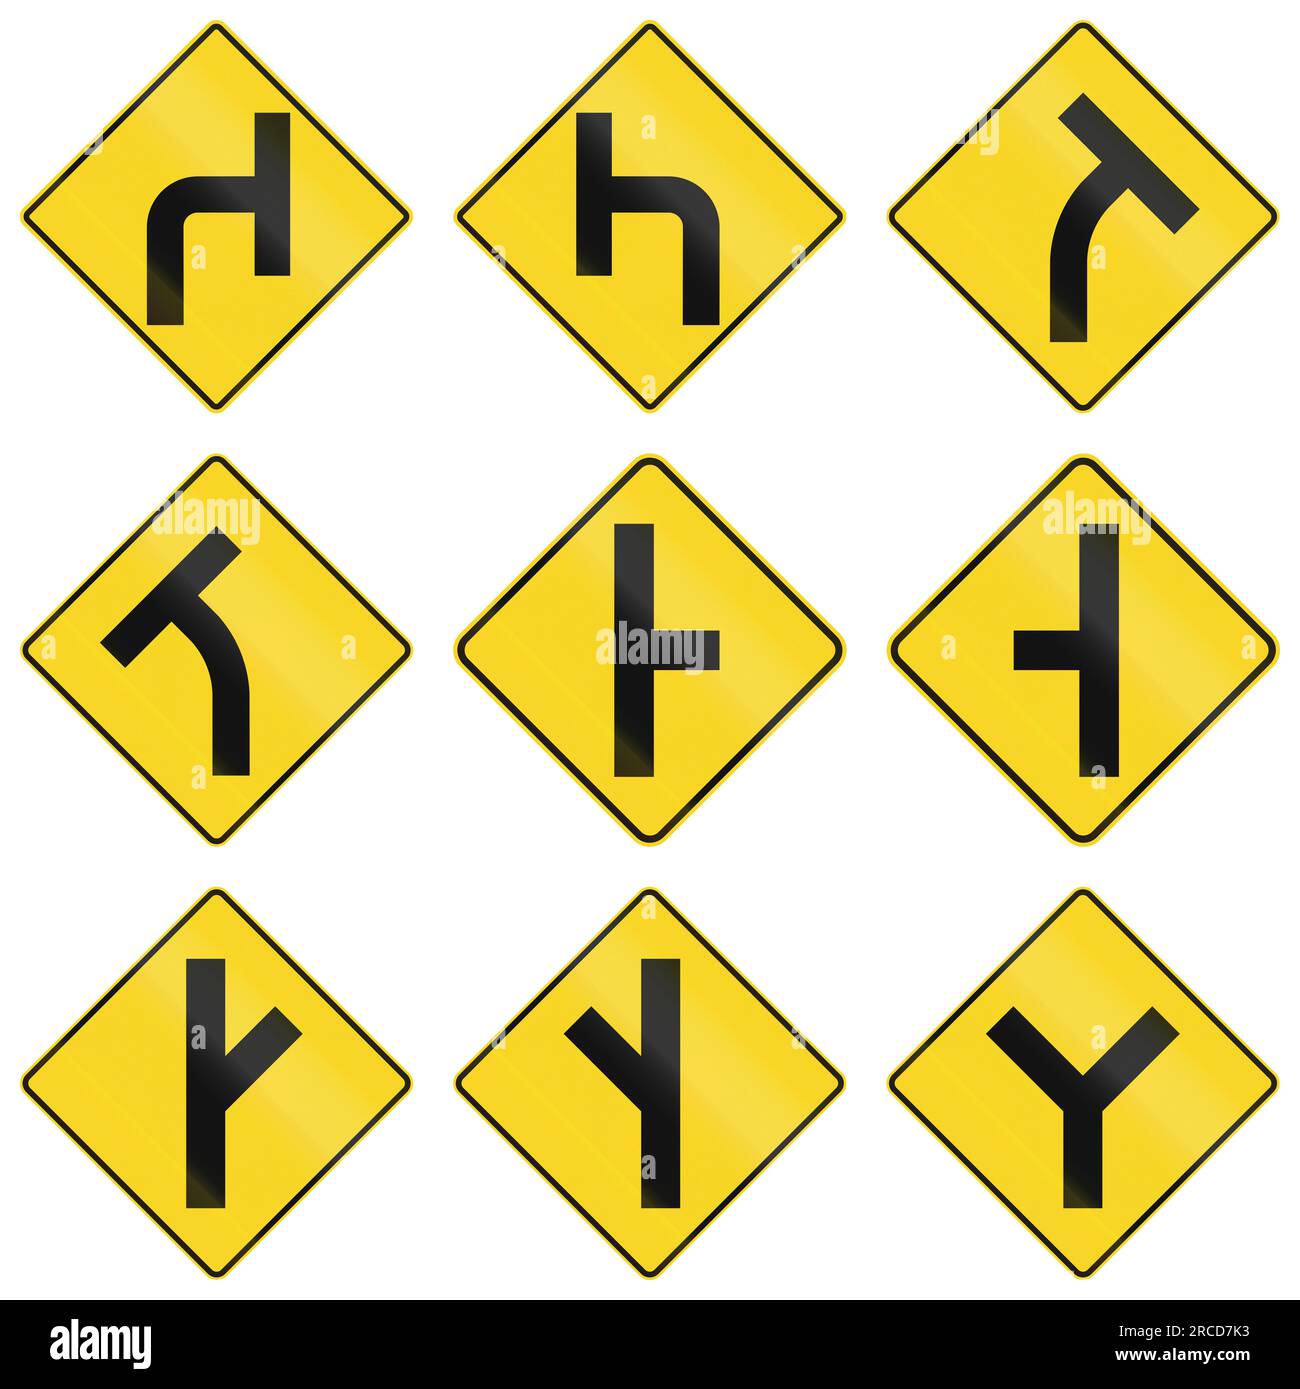 T Junction Sign Cut Out Stock Images & Pictures - Alamy